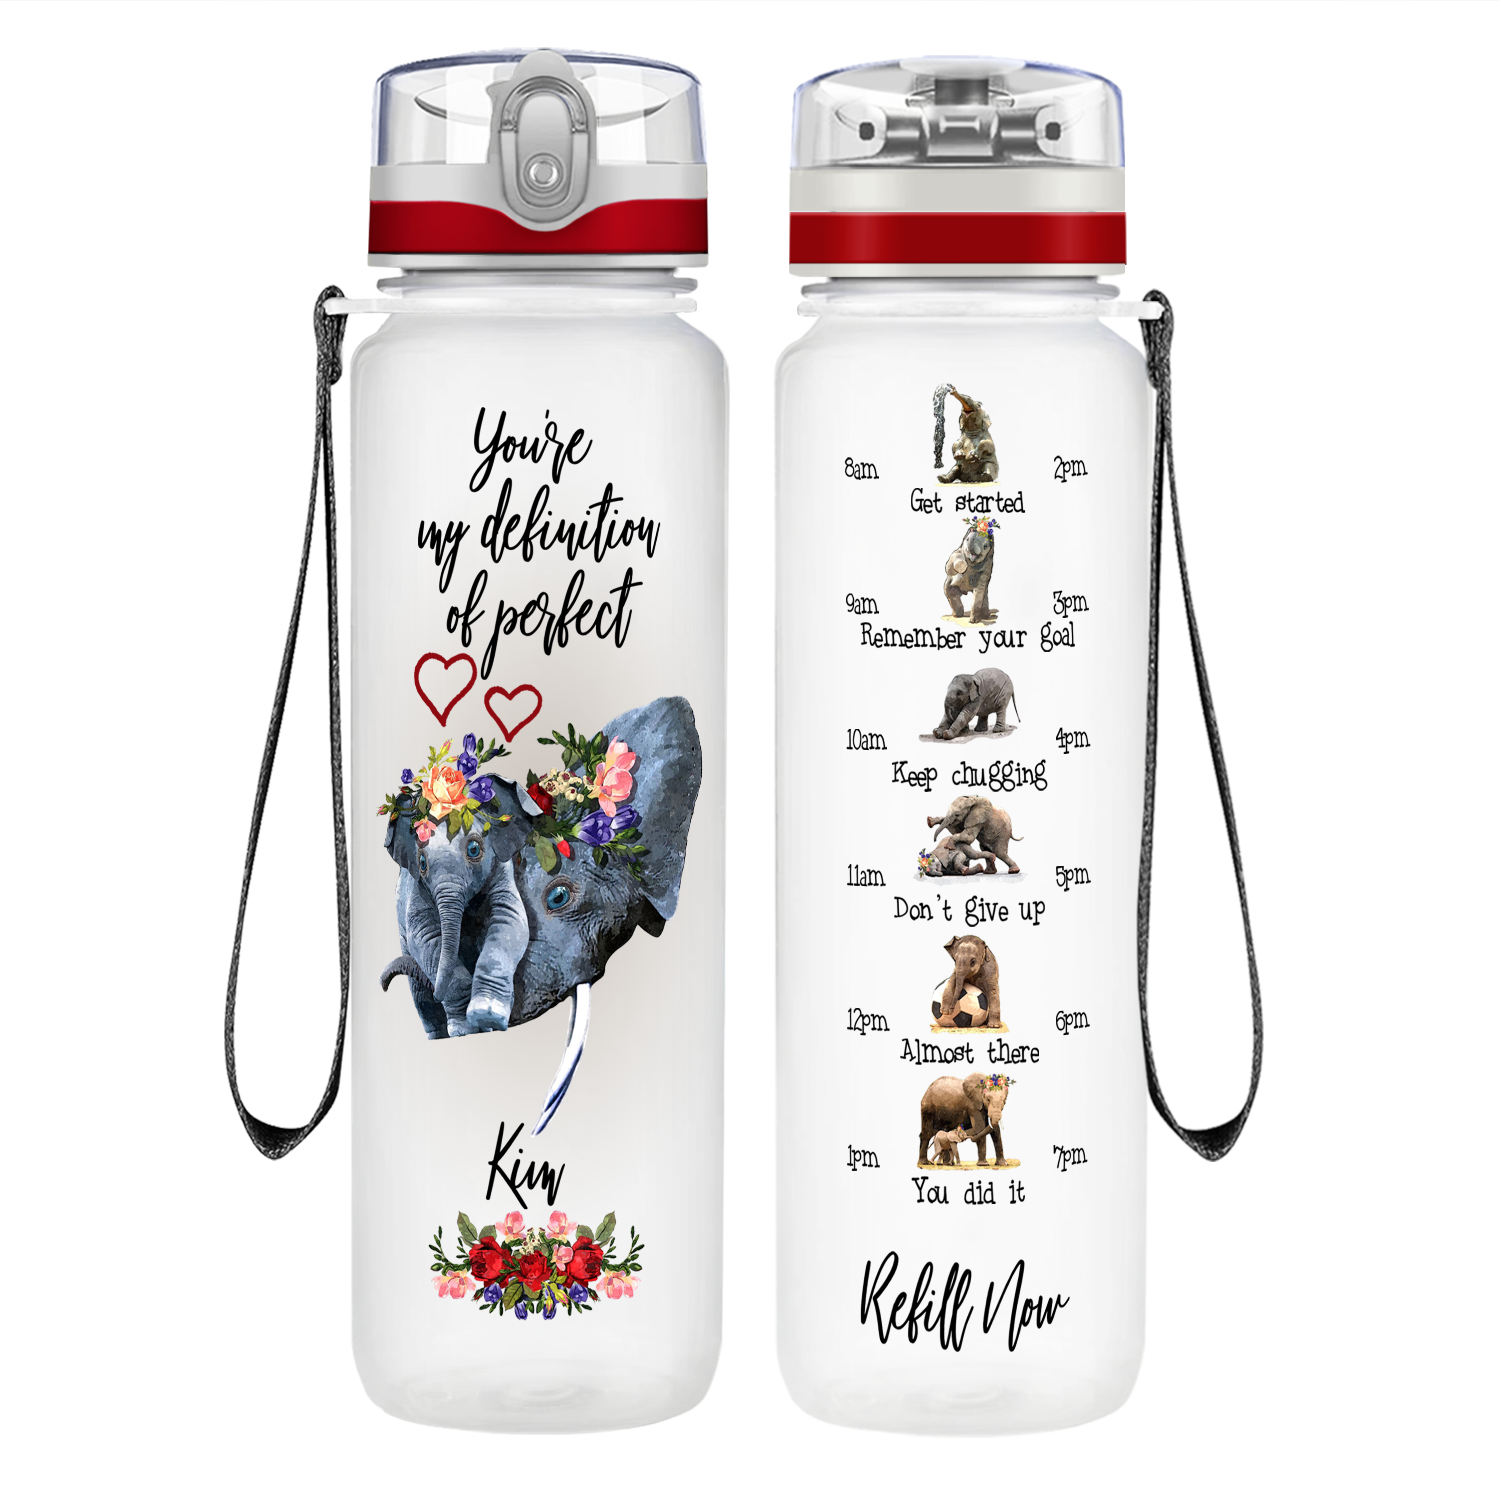 Personalized Definition of Perfect Elephants on 32 oz Motivational Tracking Water Bottle